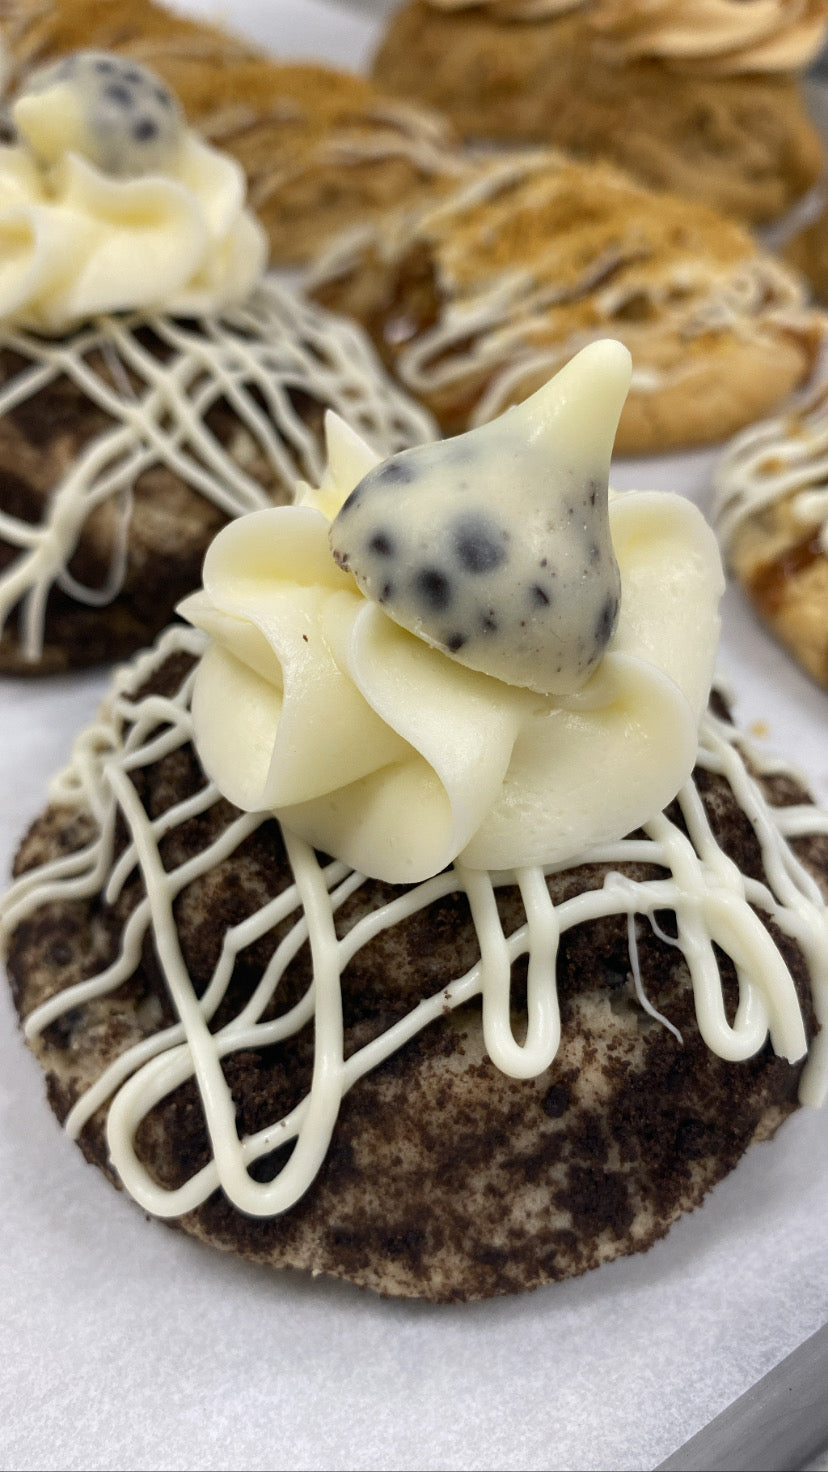 Cookies & Creme Cheesecake Cookies - Mcks' Cupcakes in South Florida